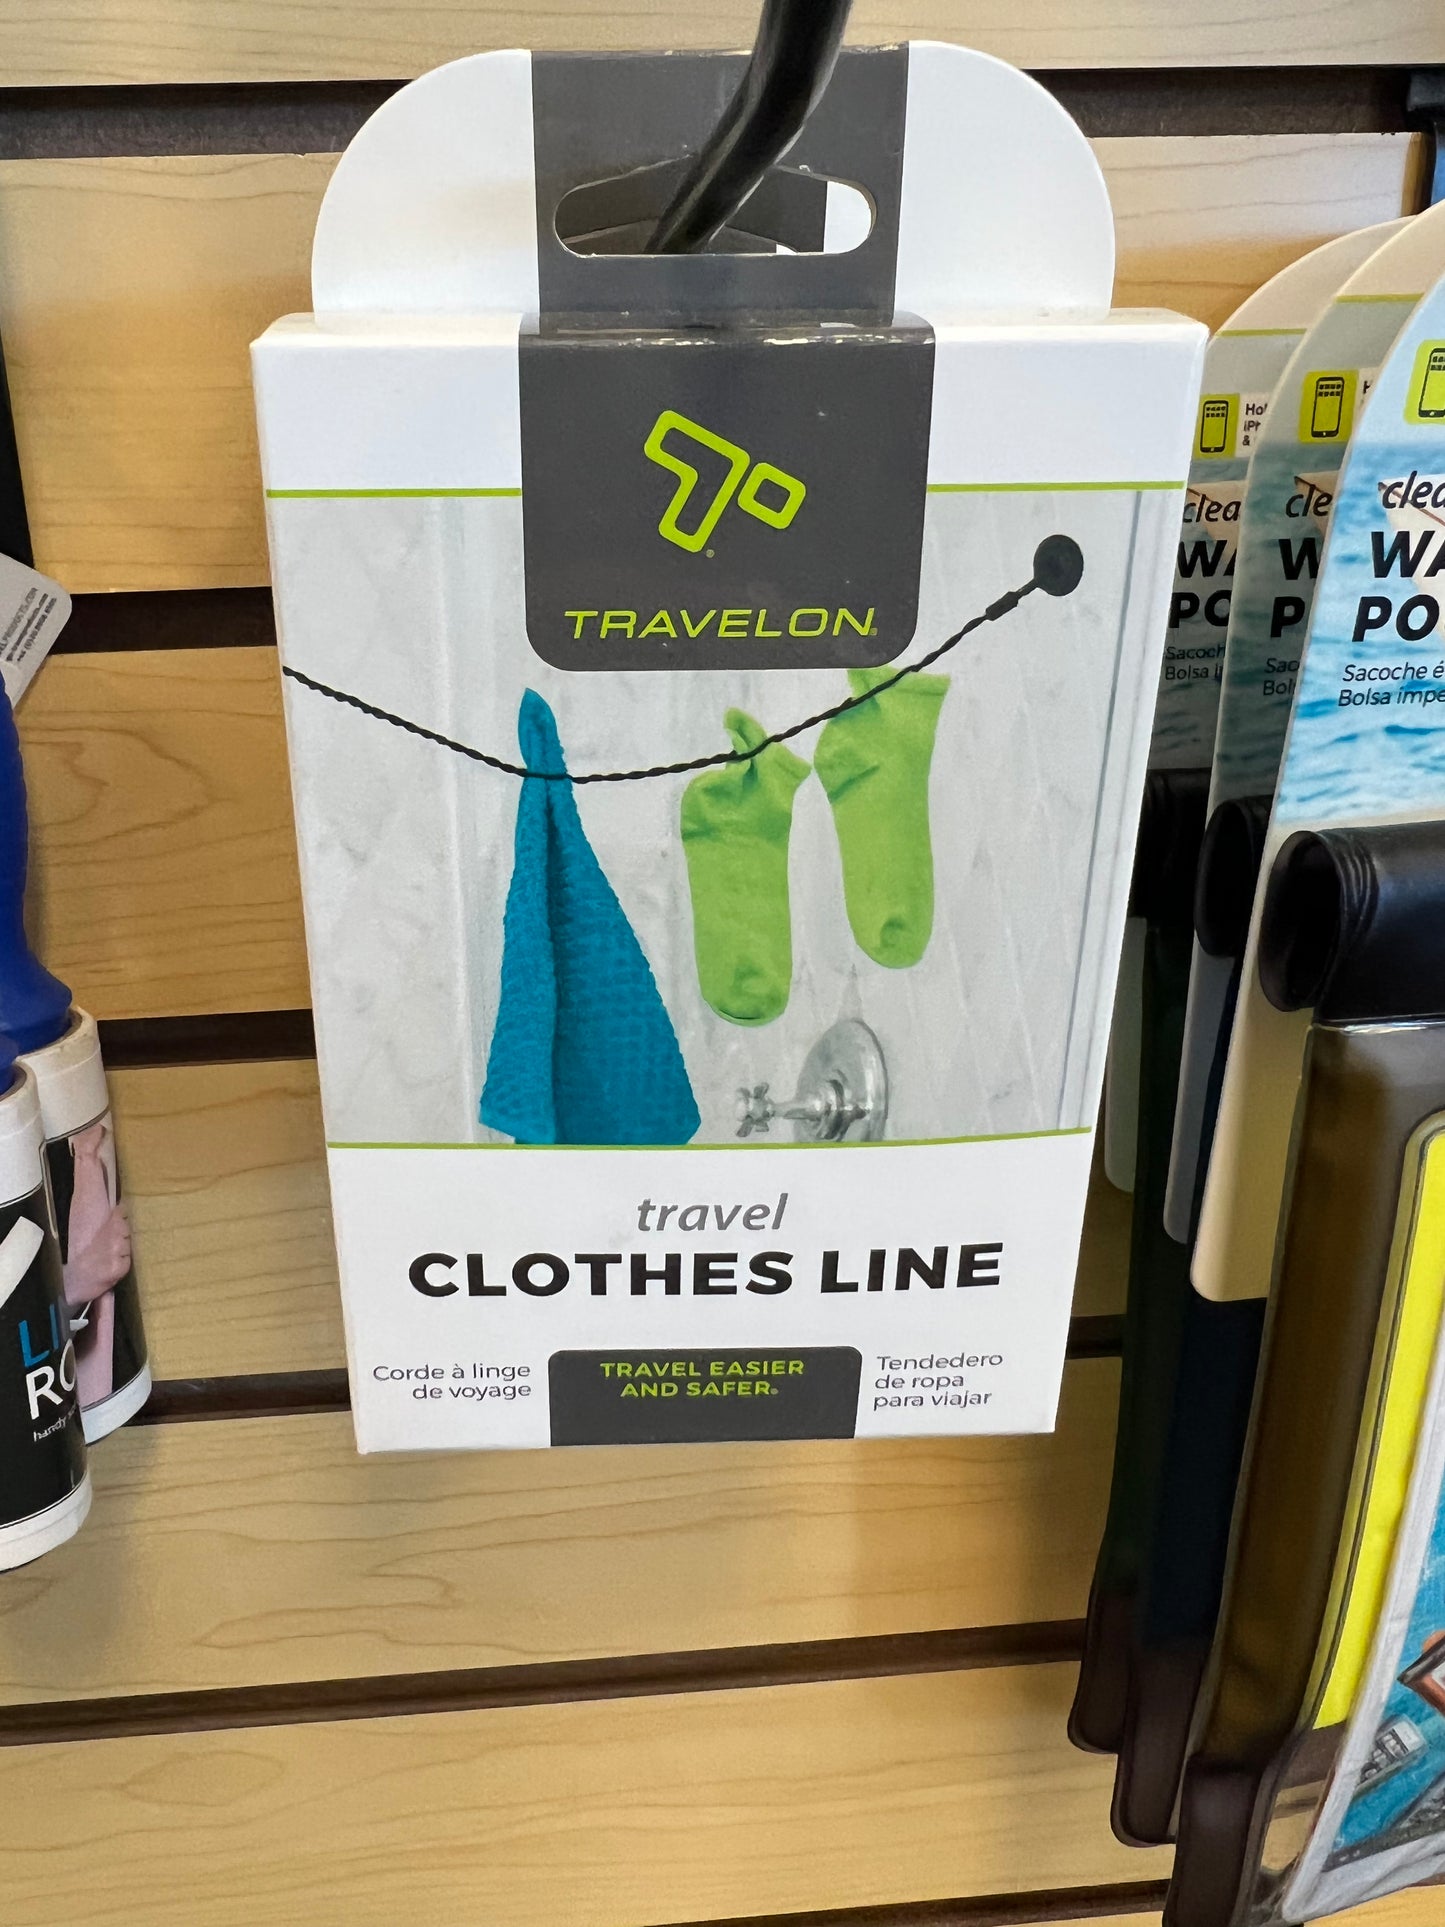 Travelon Travel Clothes Line - no clothes pins needed